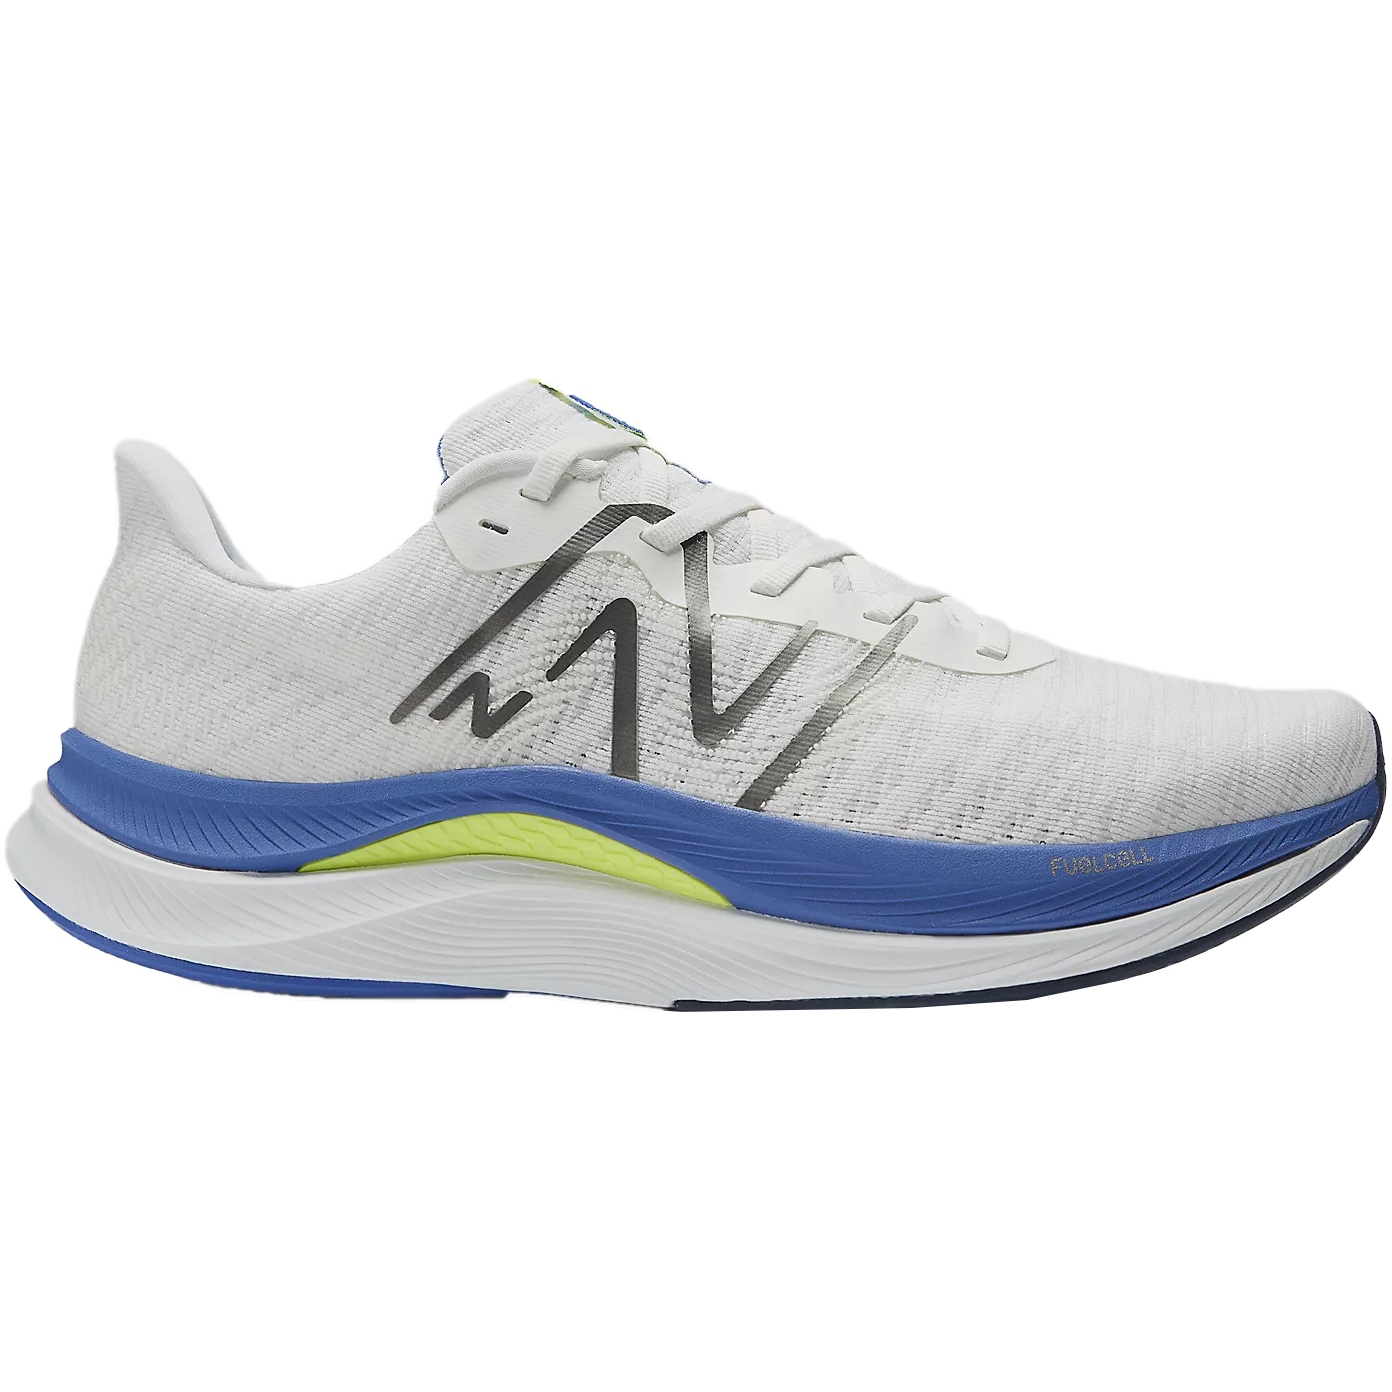 Picture of New Balance FuelCell Propel v4 Running Shoes Men - White/Marine Blue